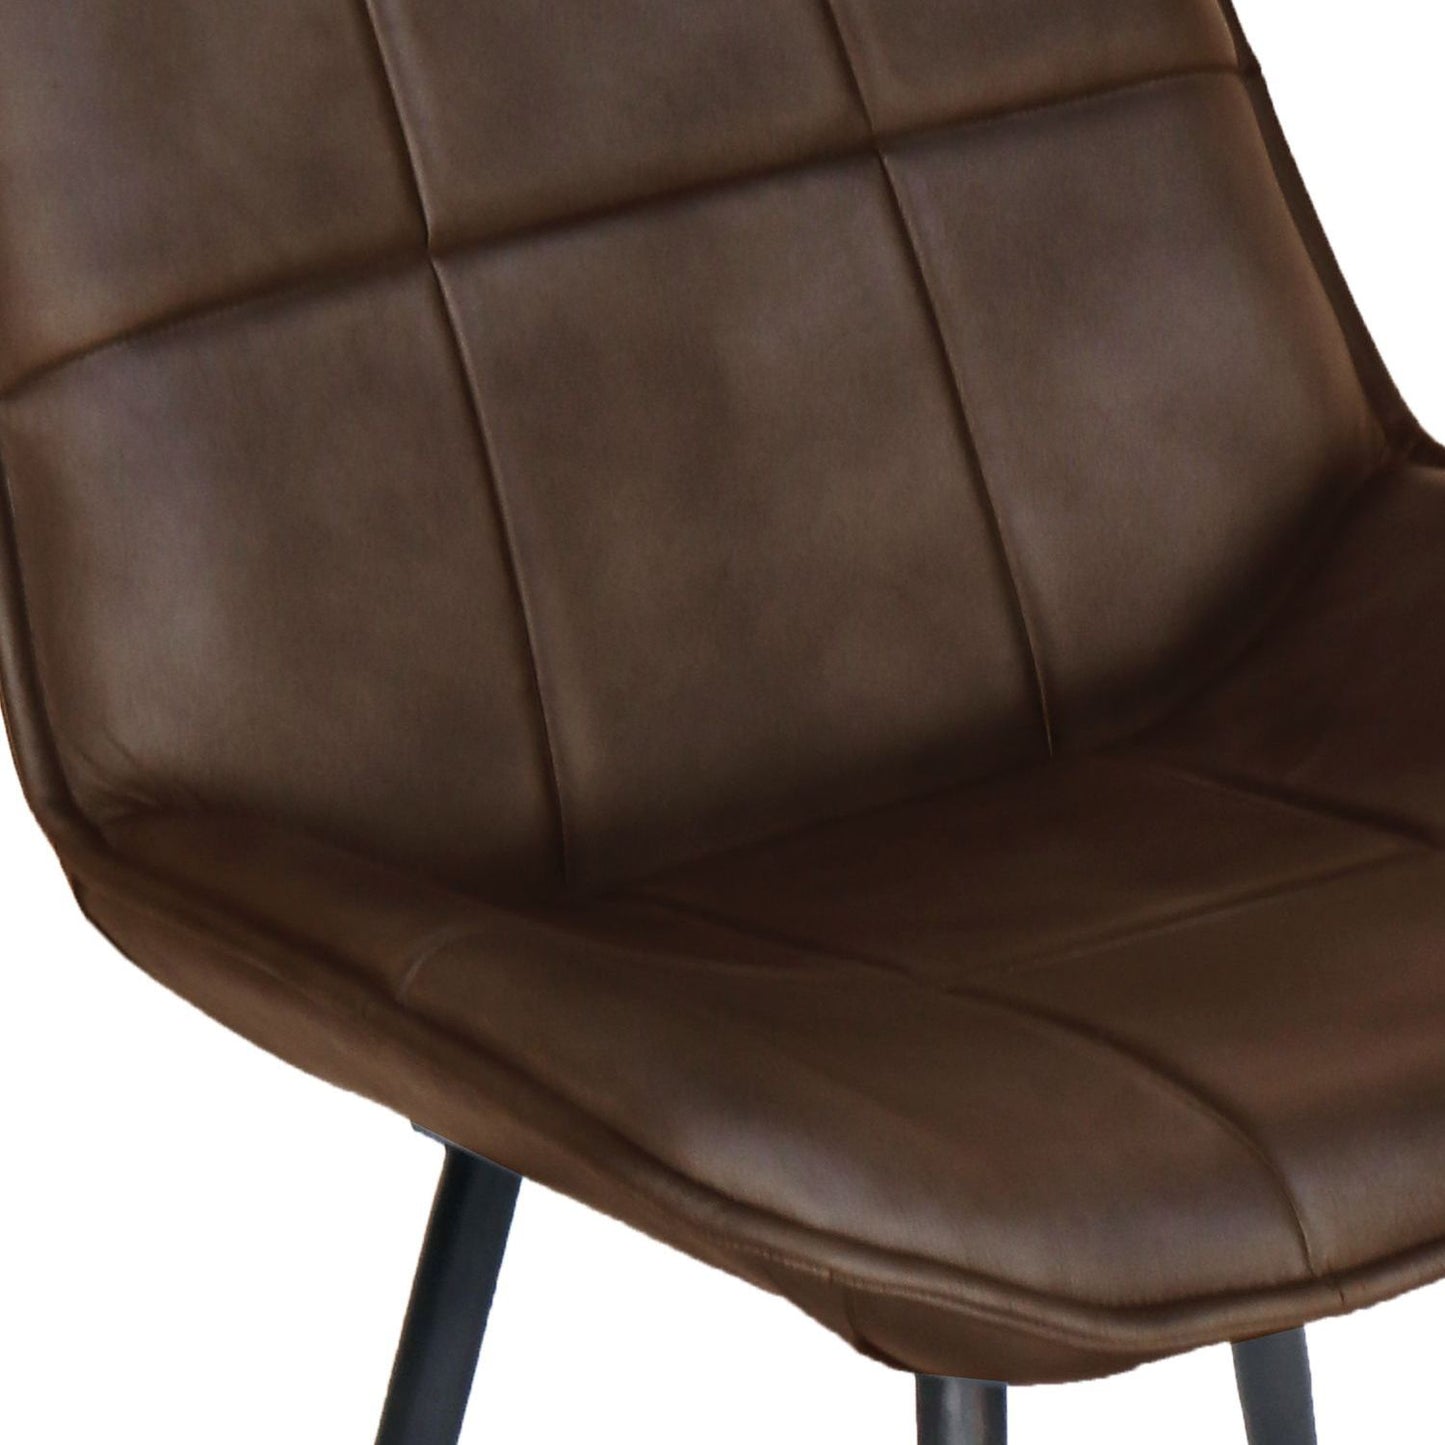 Faux Leather Dining Chair - Brown